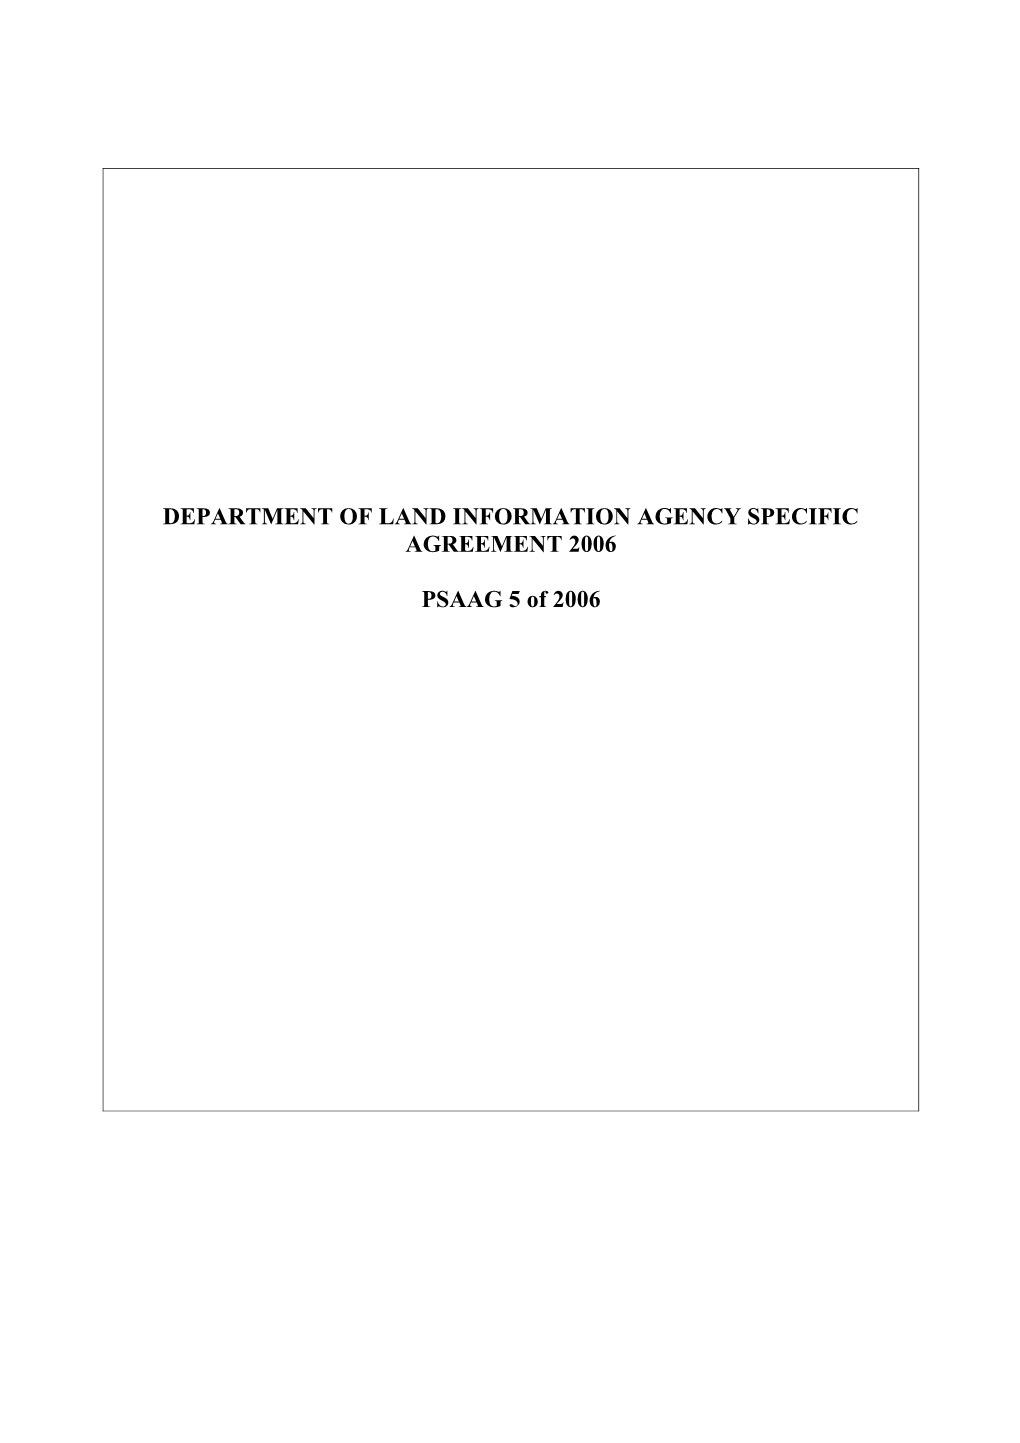 Department of Land Information Agency Specific Agreement 2006 200604358 DEP002